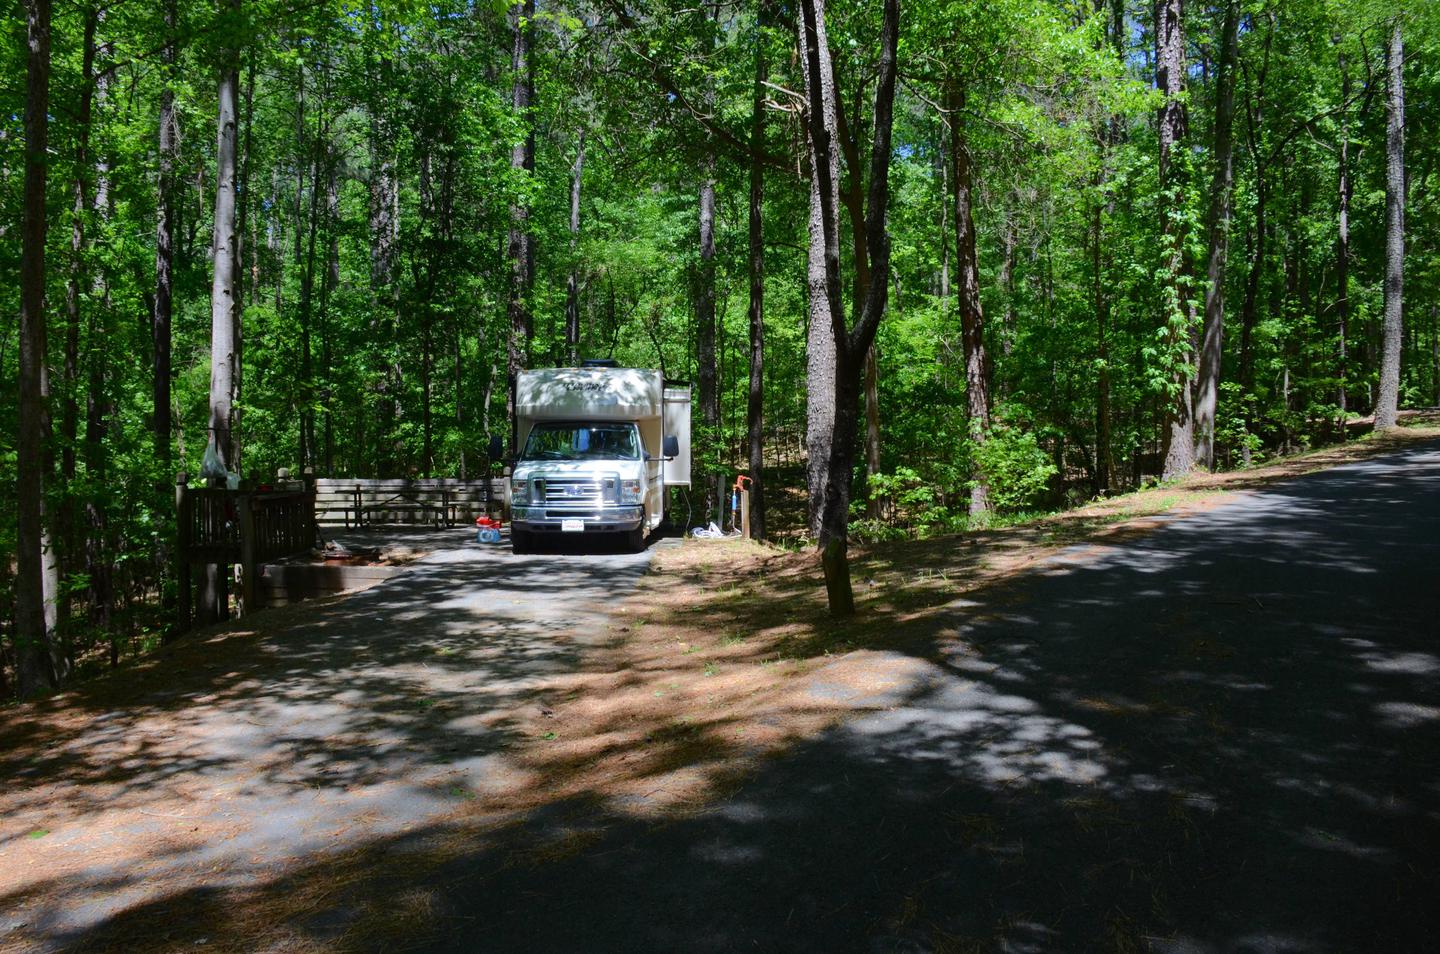 Driveway entrance angle/slope, utilities-side clearance, awning-side clearance.McKinney Campground, campsite 118.